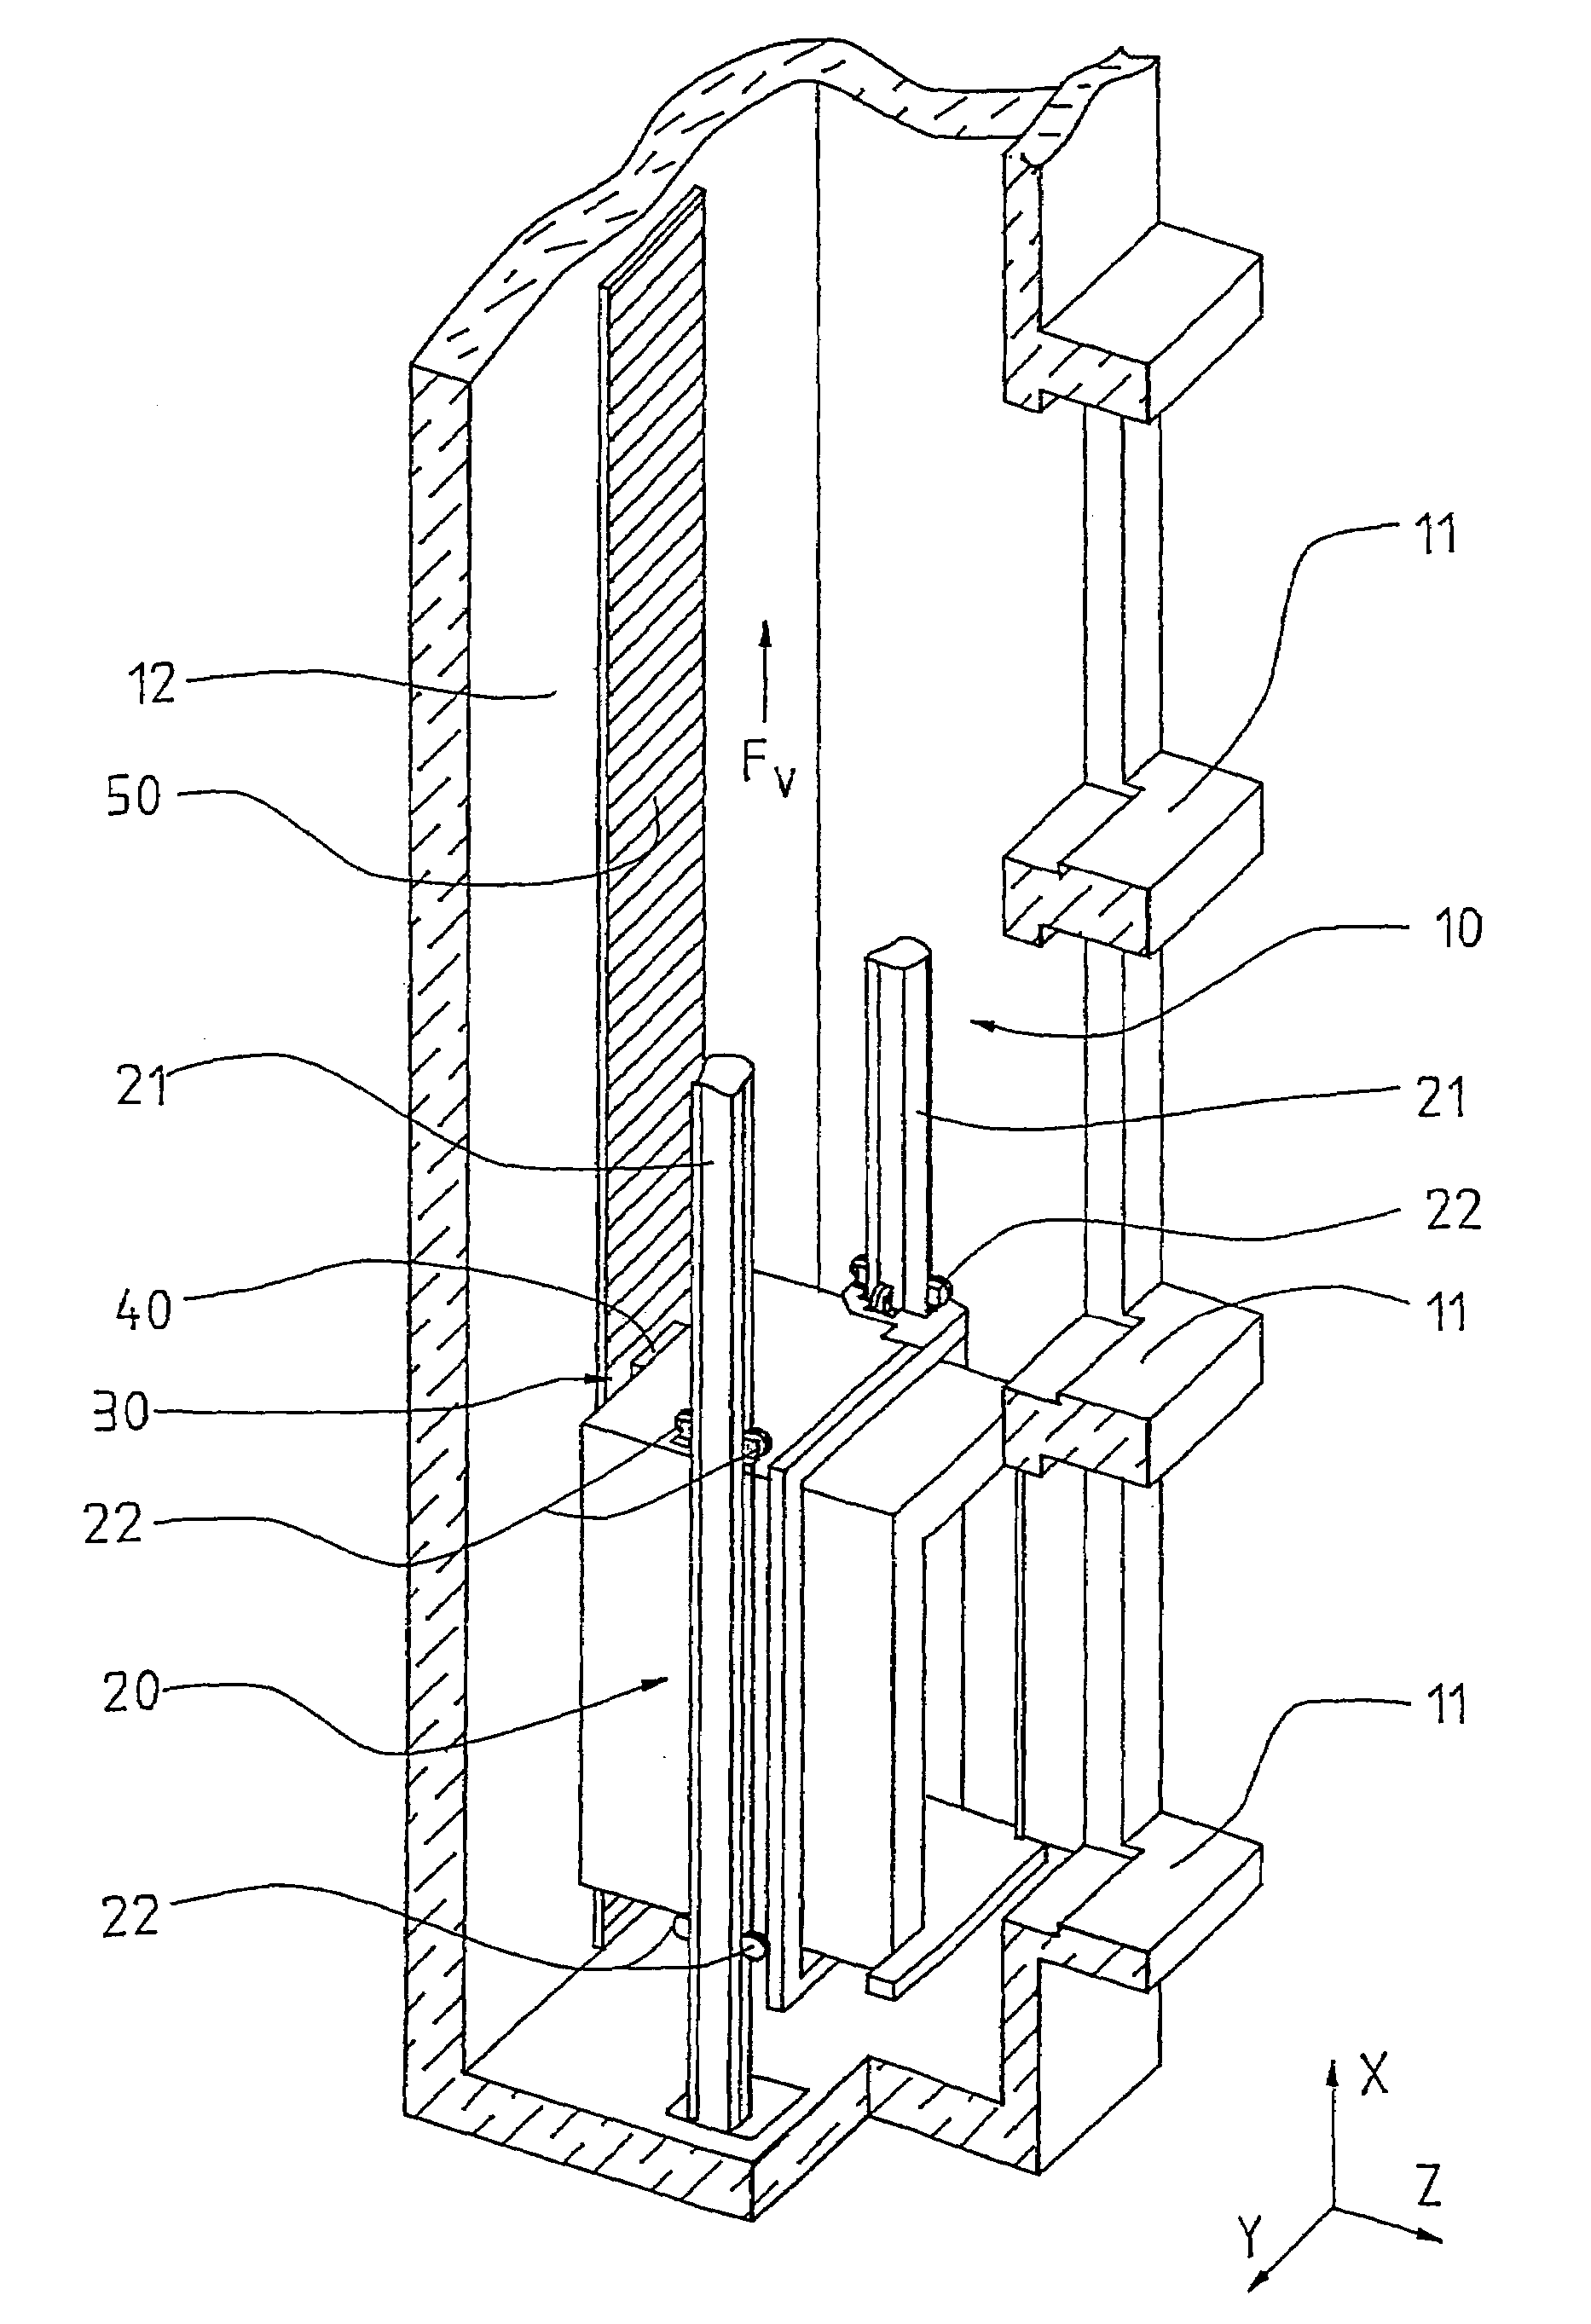 Elevator with transverse flux drive